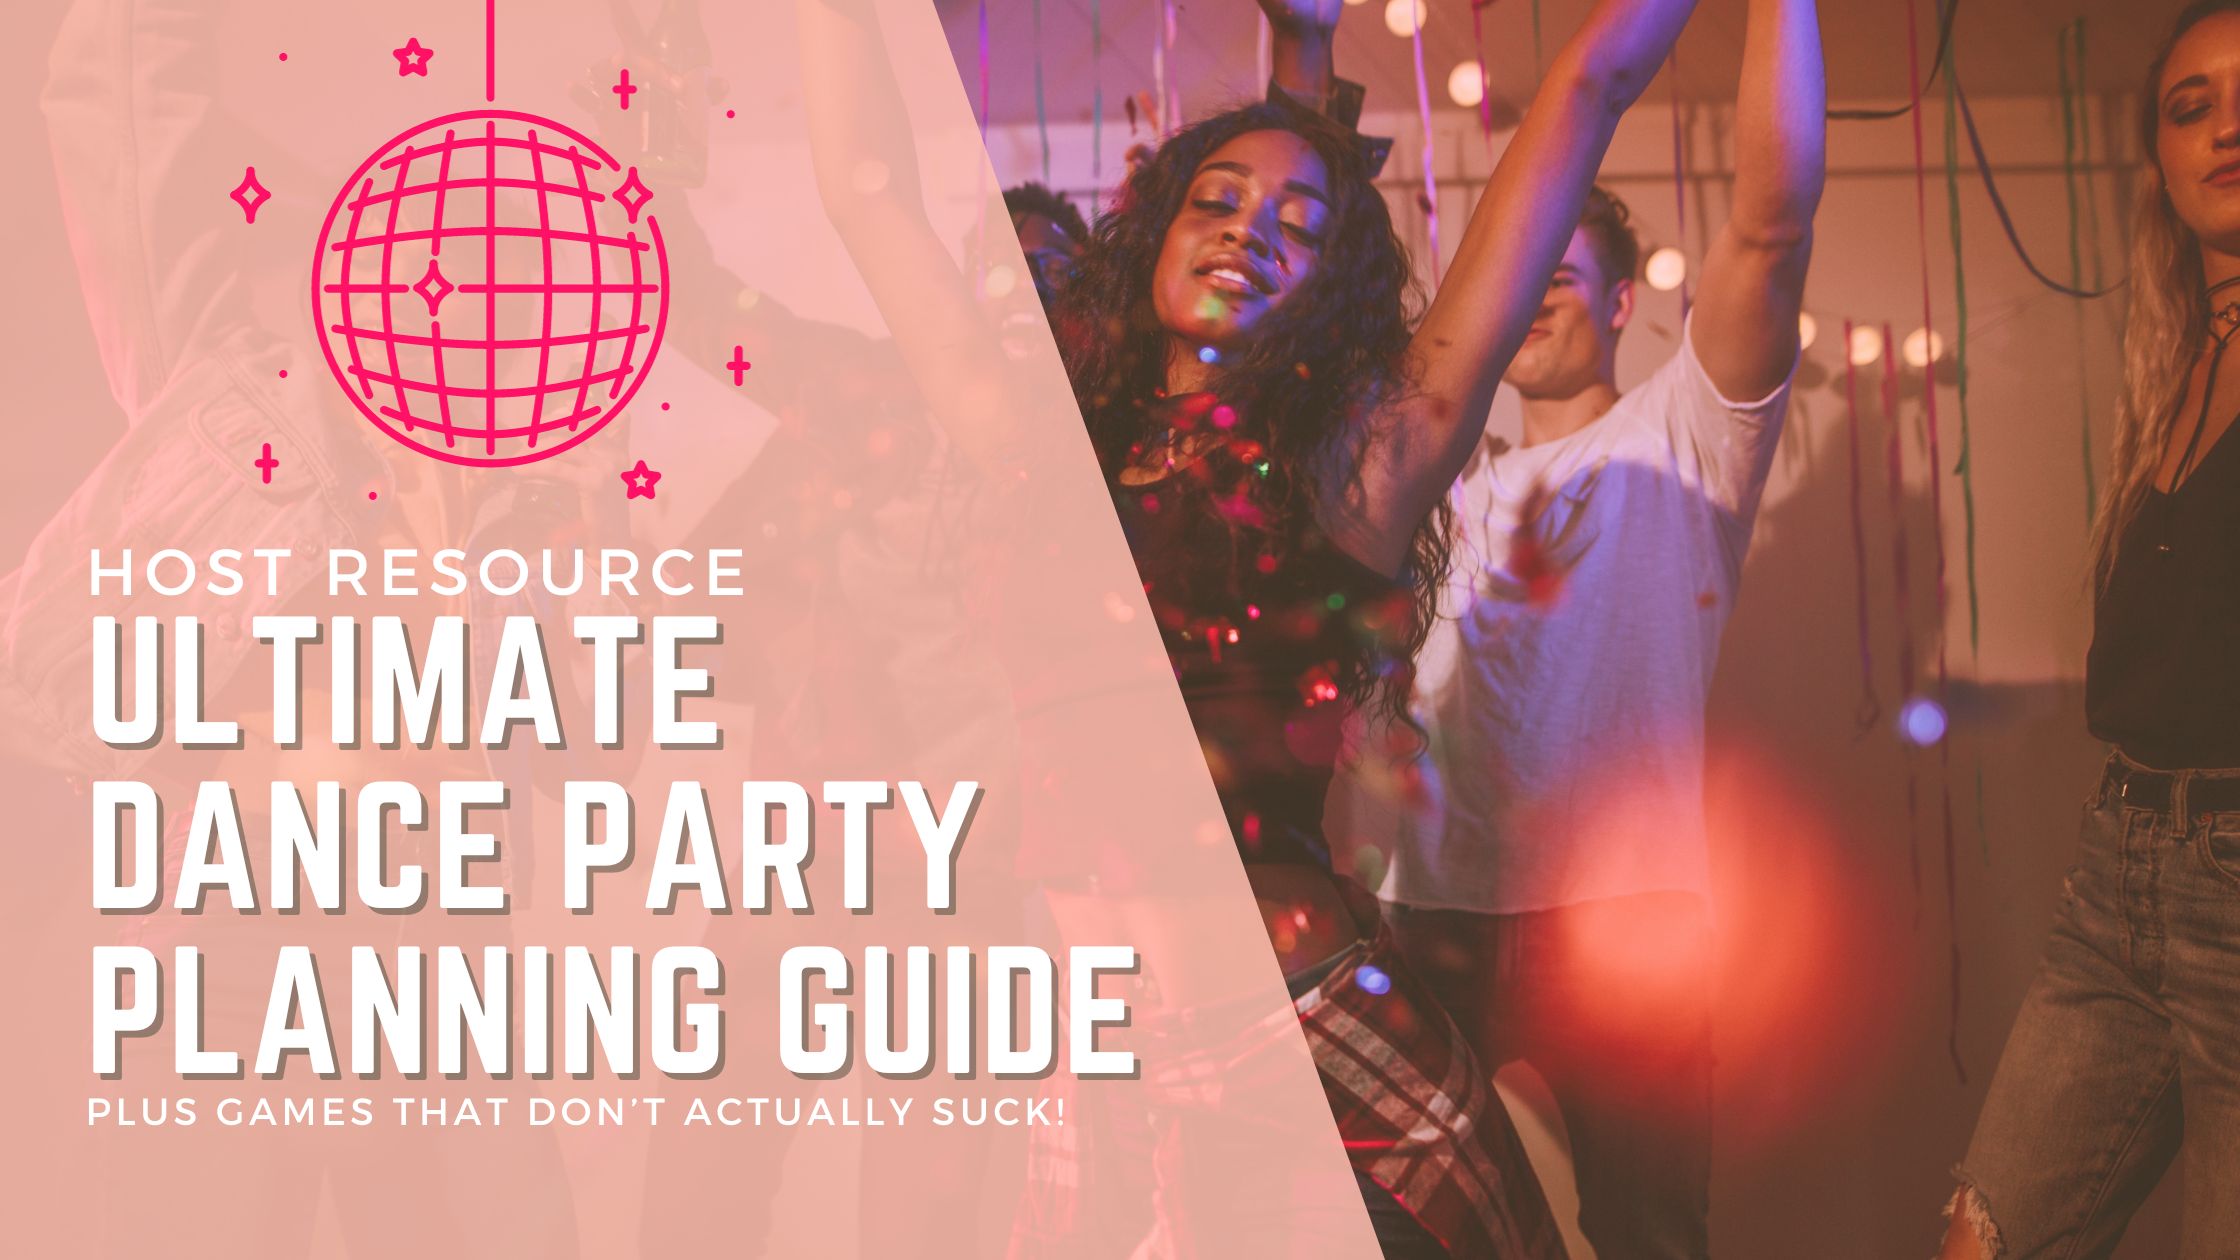 Fun Dance Party Games Adults Actually Enjoy. Ultimate Guide!